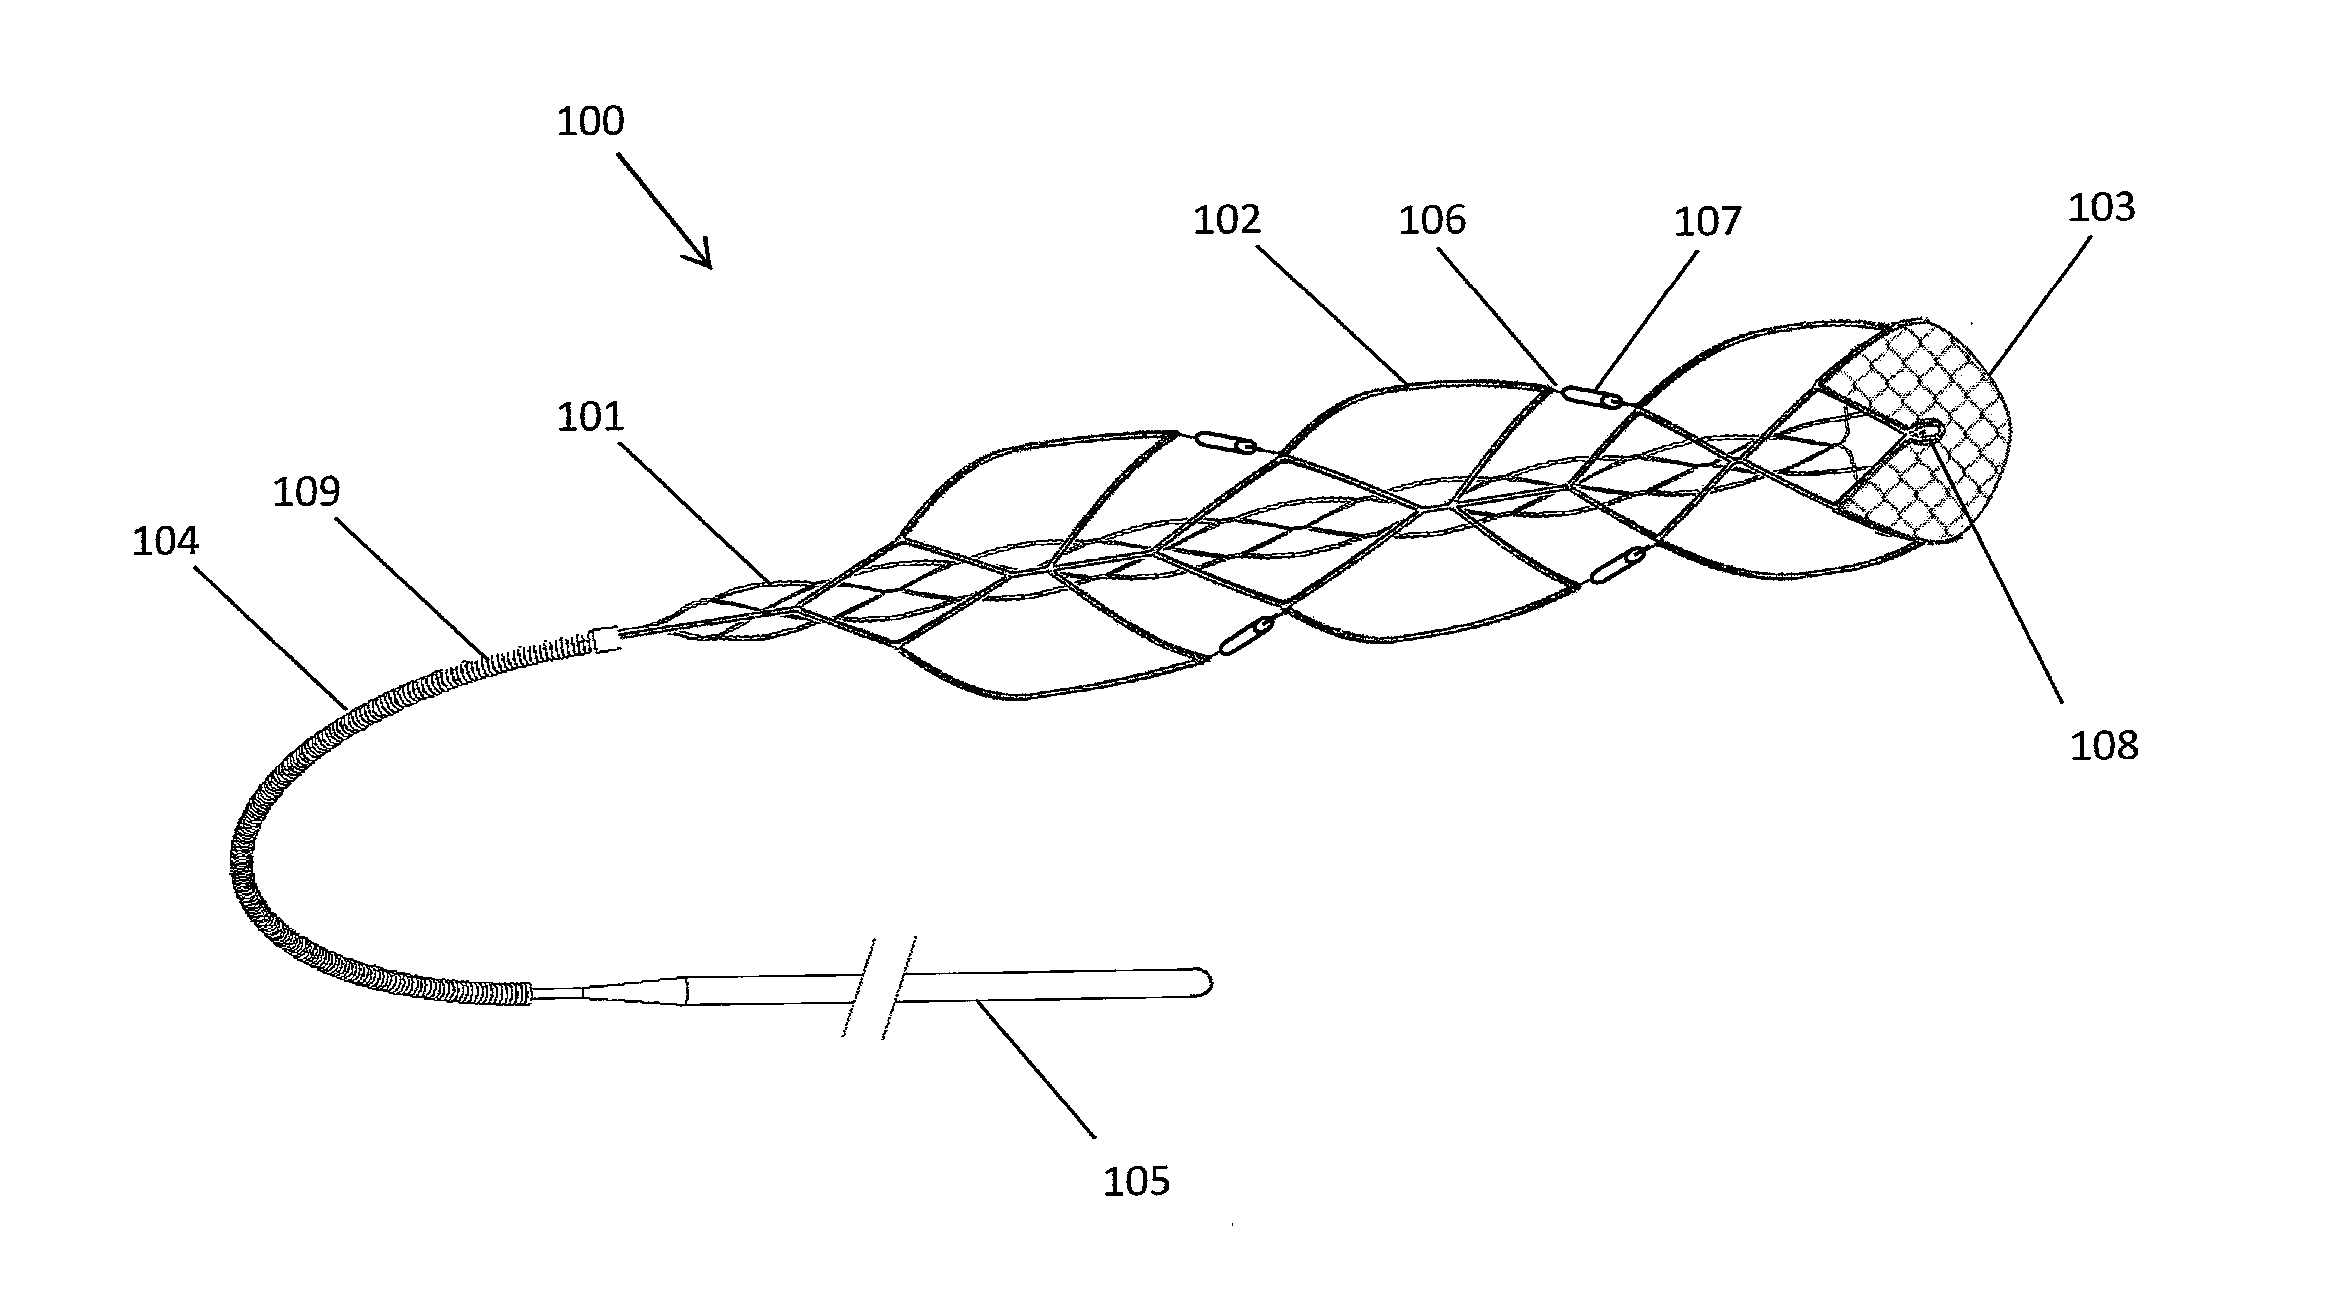 Devices and methods for removal of acute blockages from blood vessels